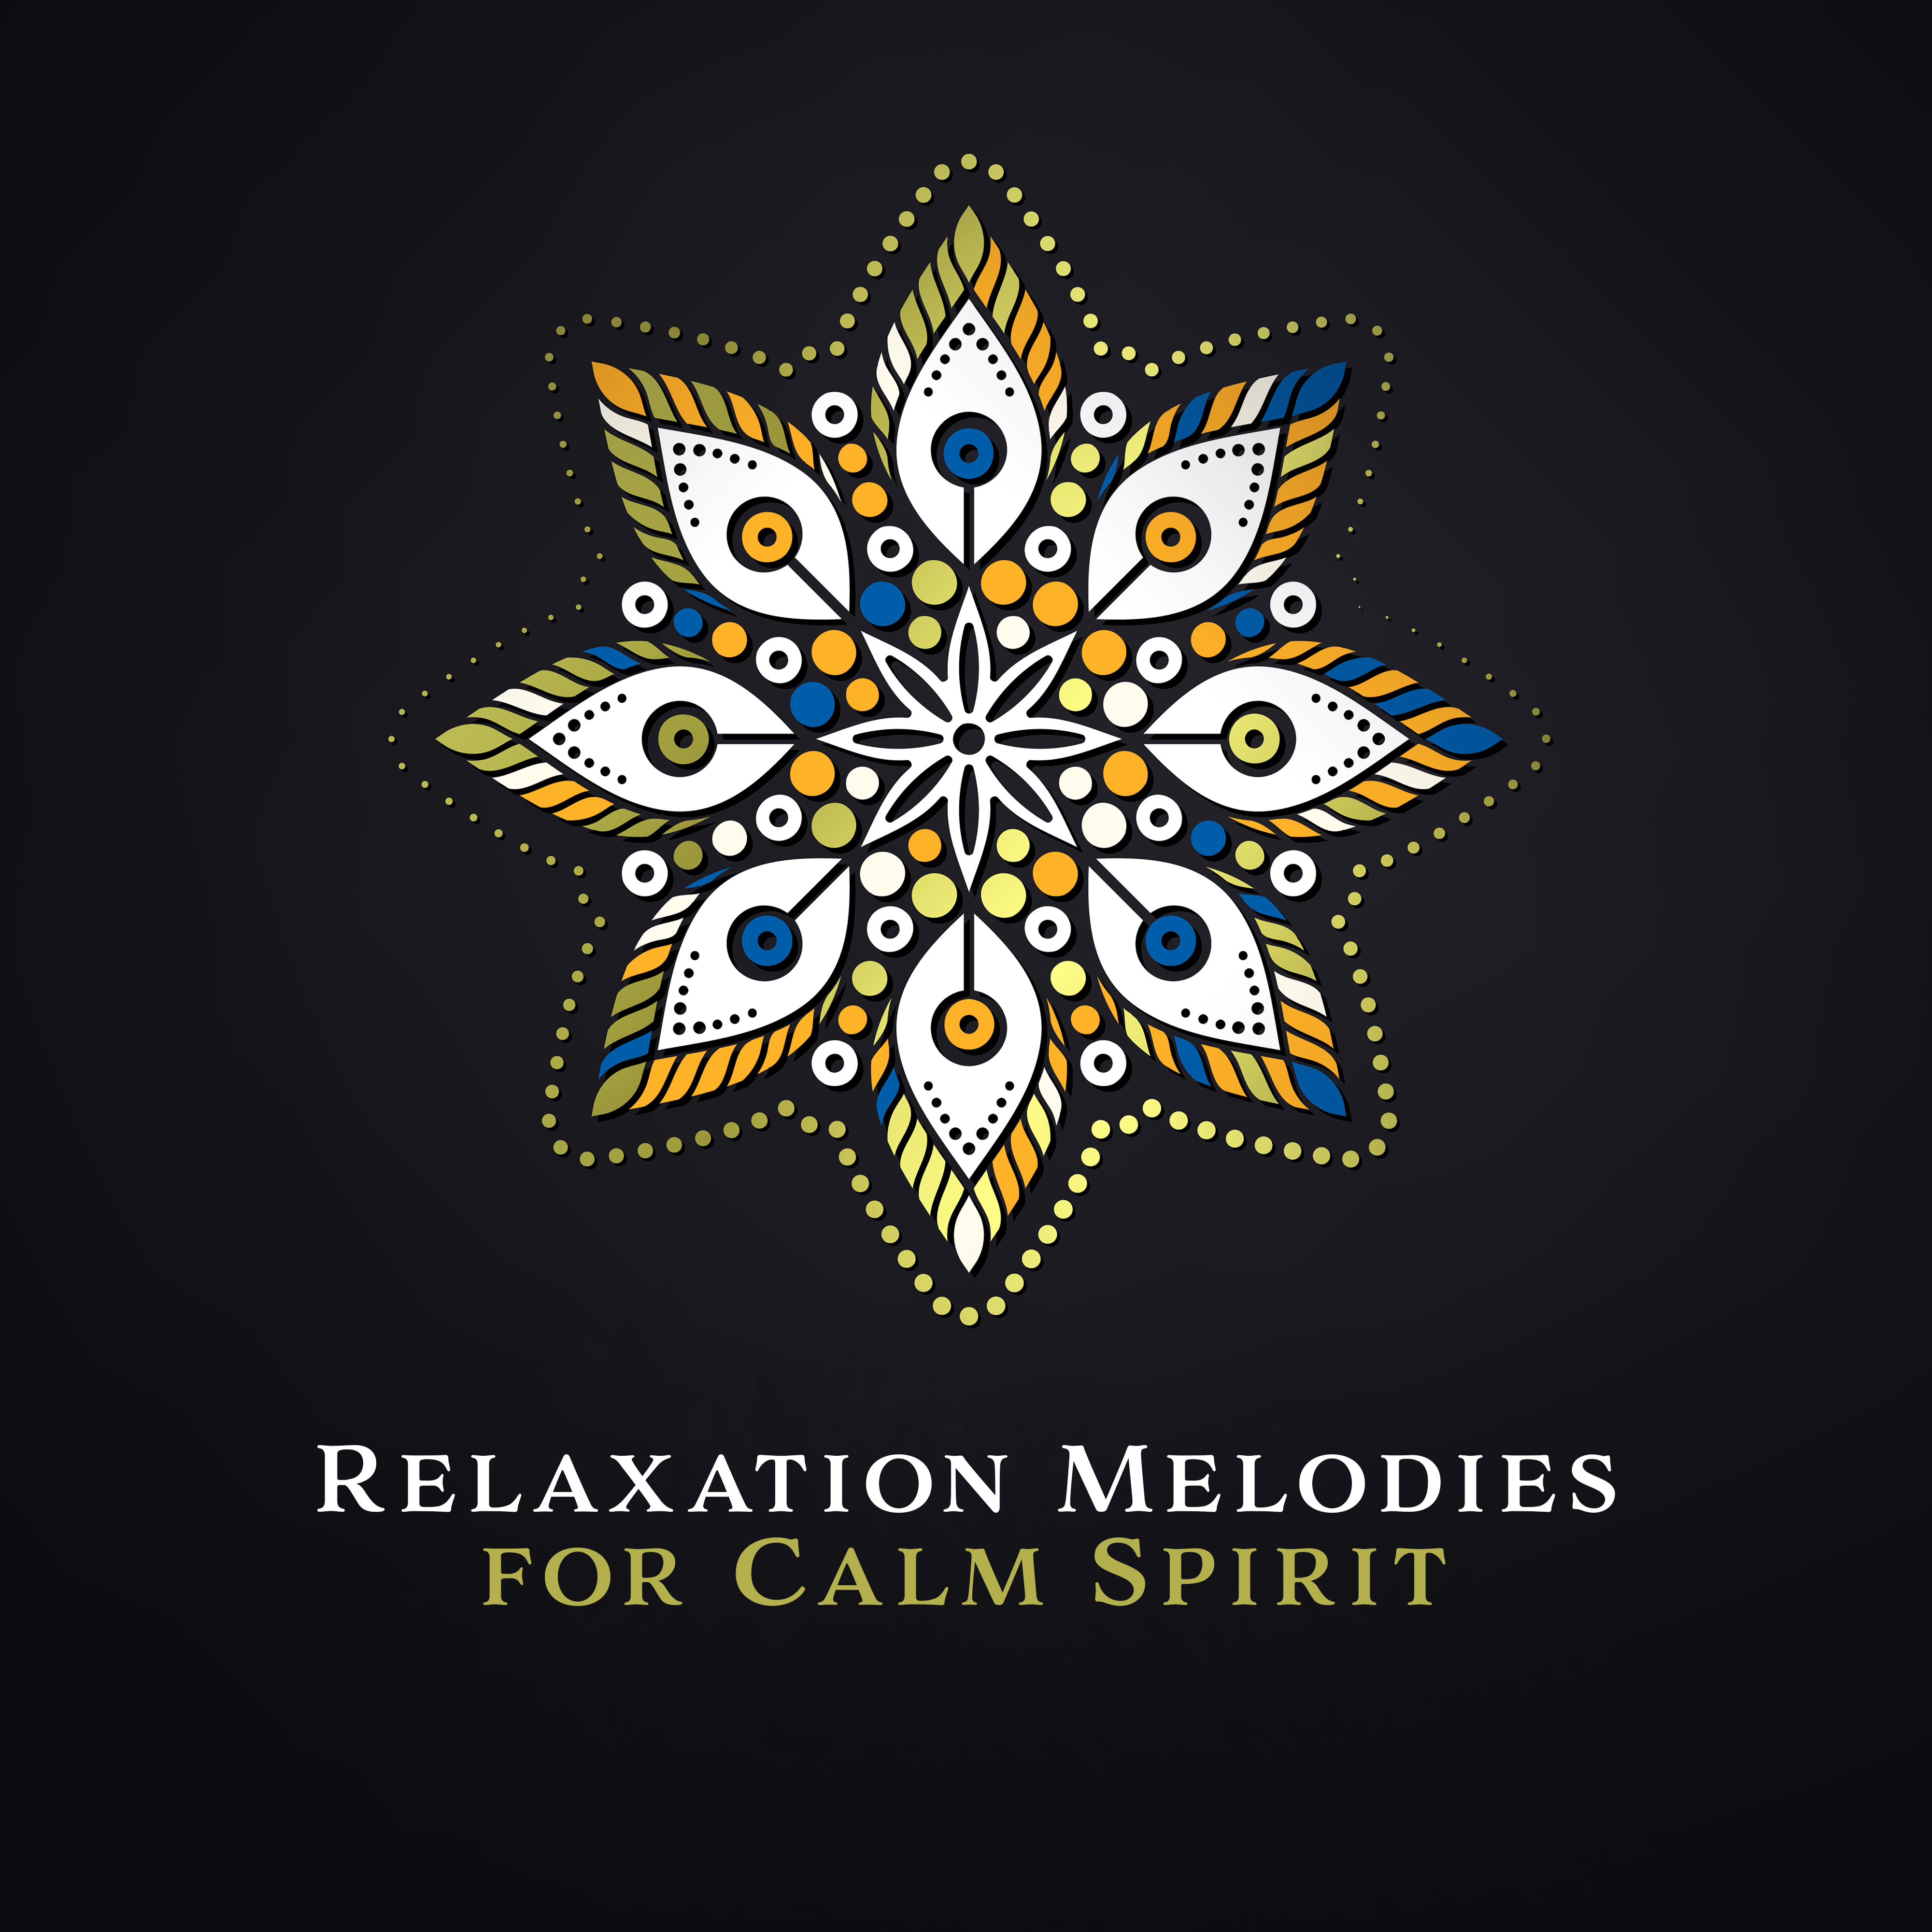 Relaxation Melodies for Calm Spirit